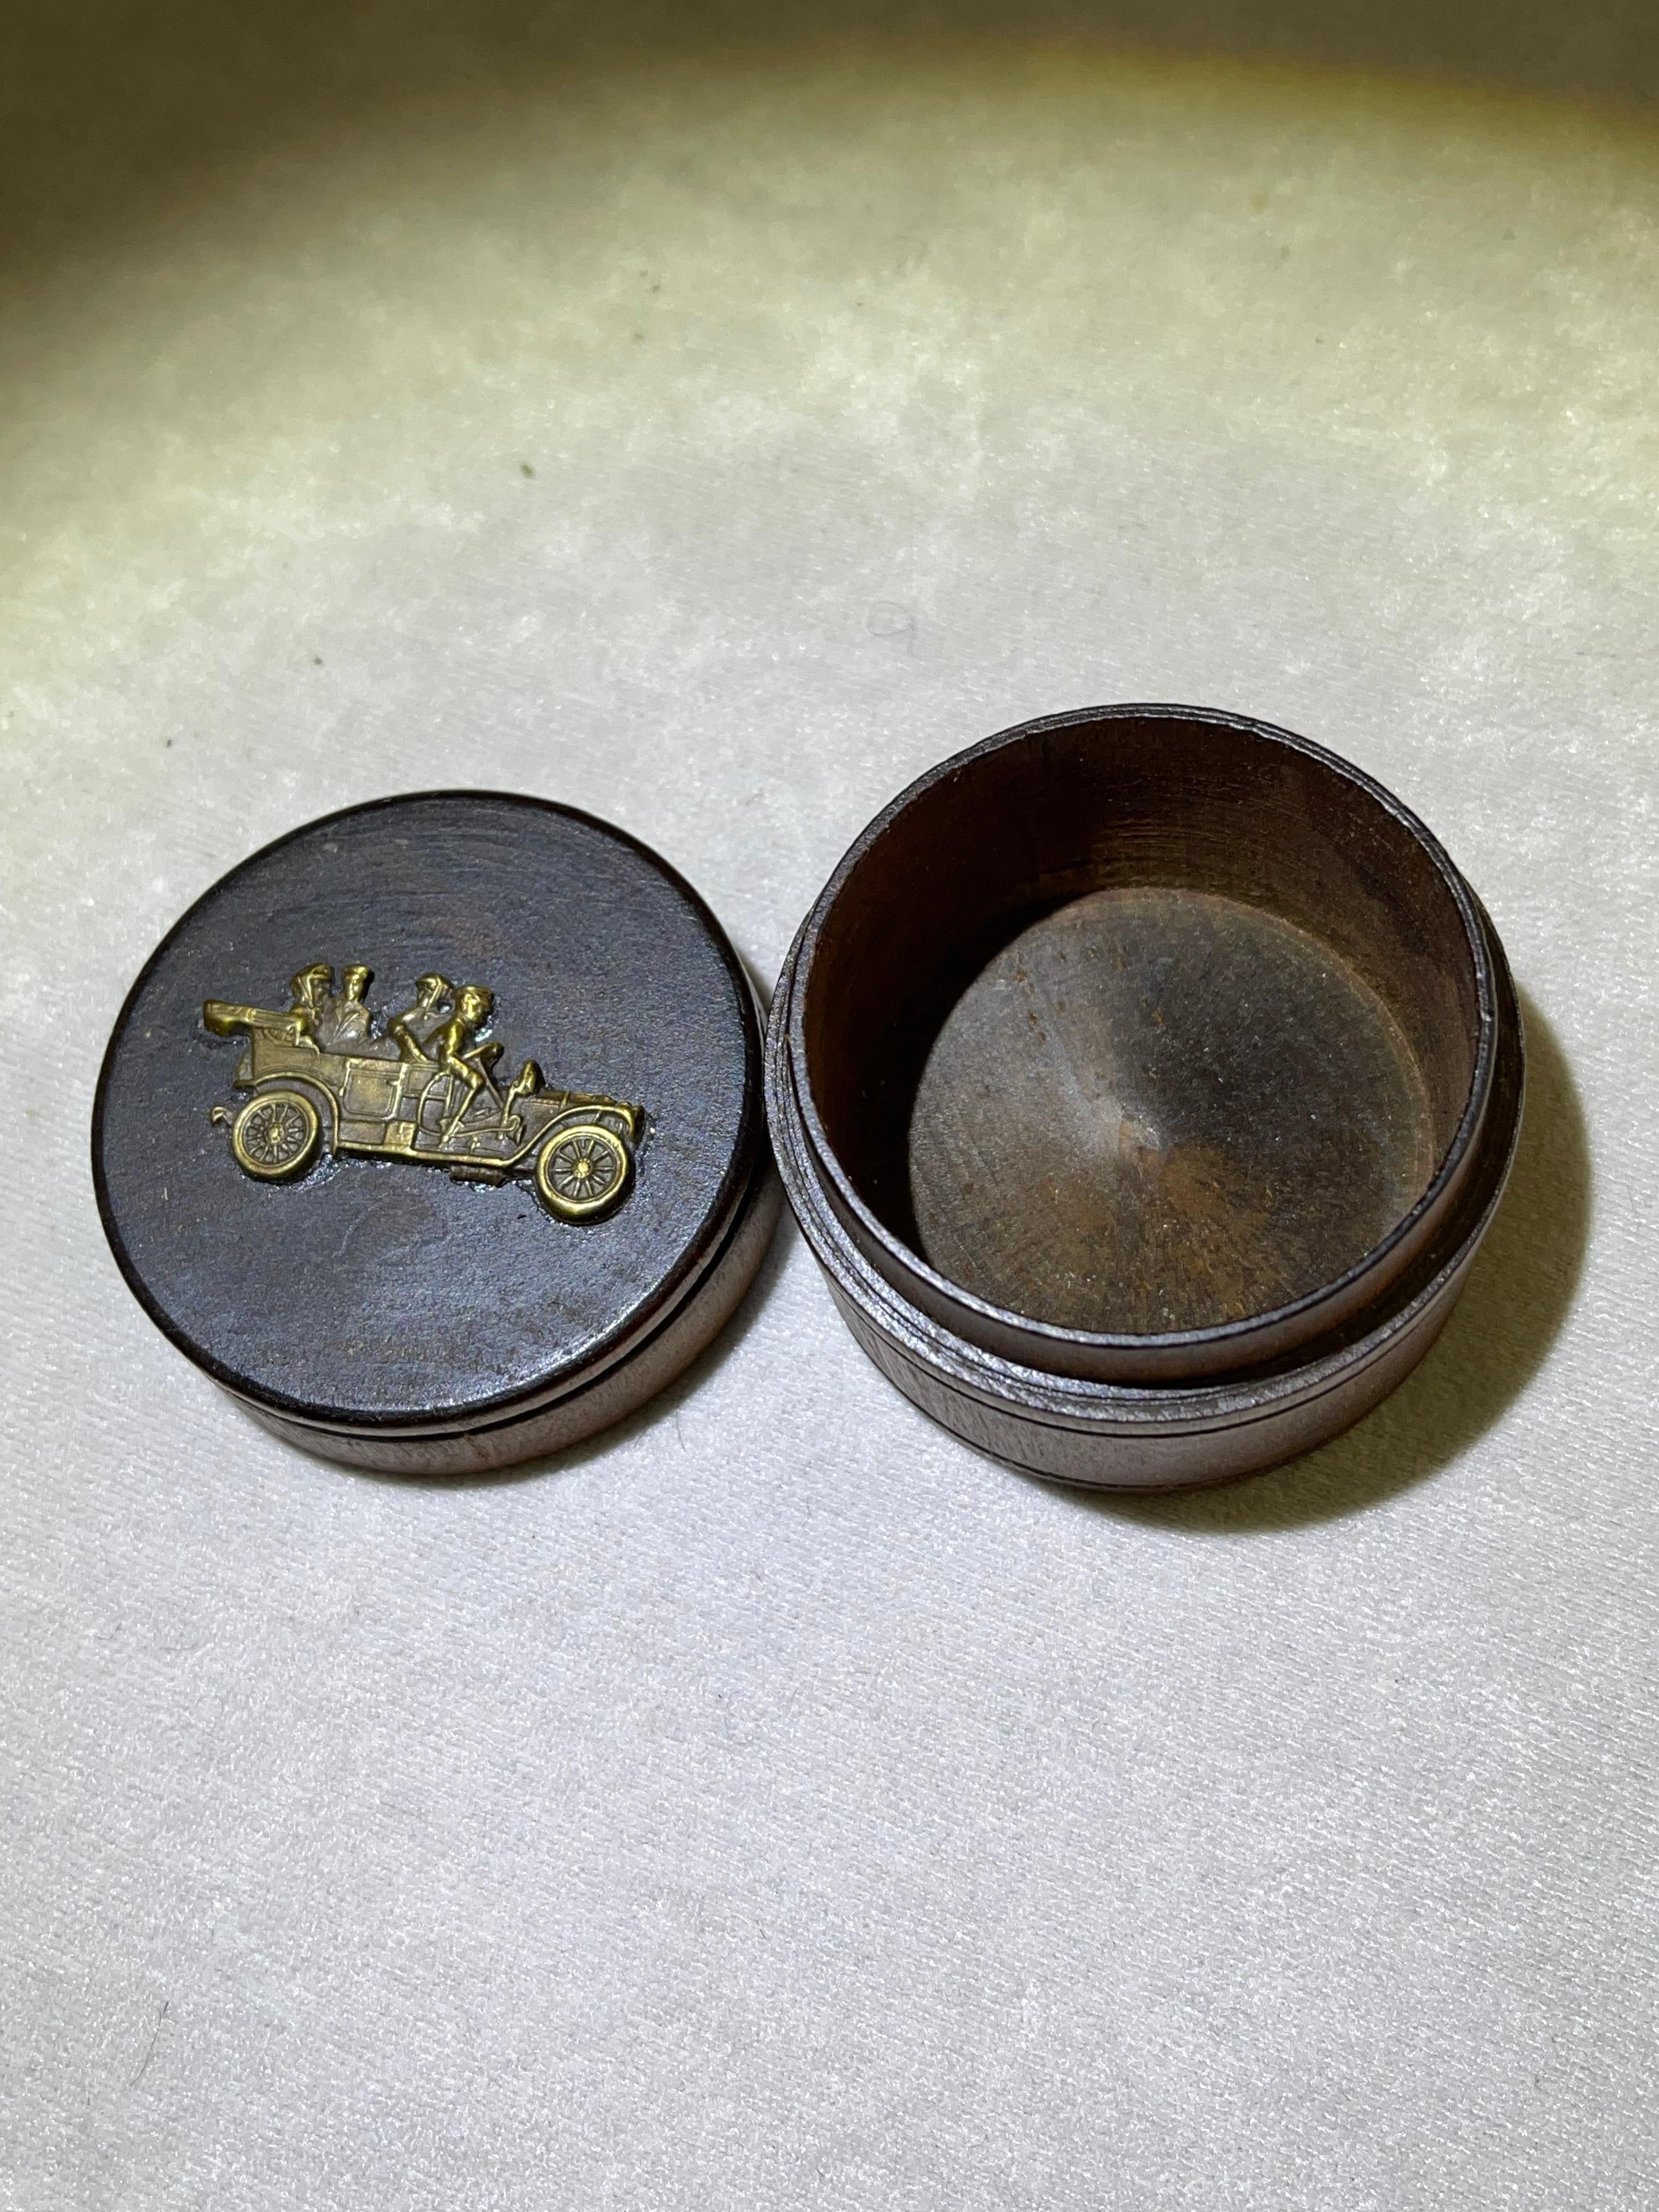 This cute little pill box has survived over 100 years. Intended to carry snuff, or pills if you wish, but primarily to make you smile when you see that old car attached to the lid. The curved wood has remained entirely intact, and free of splitting